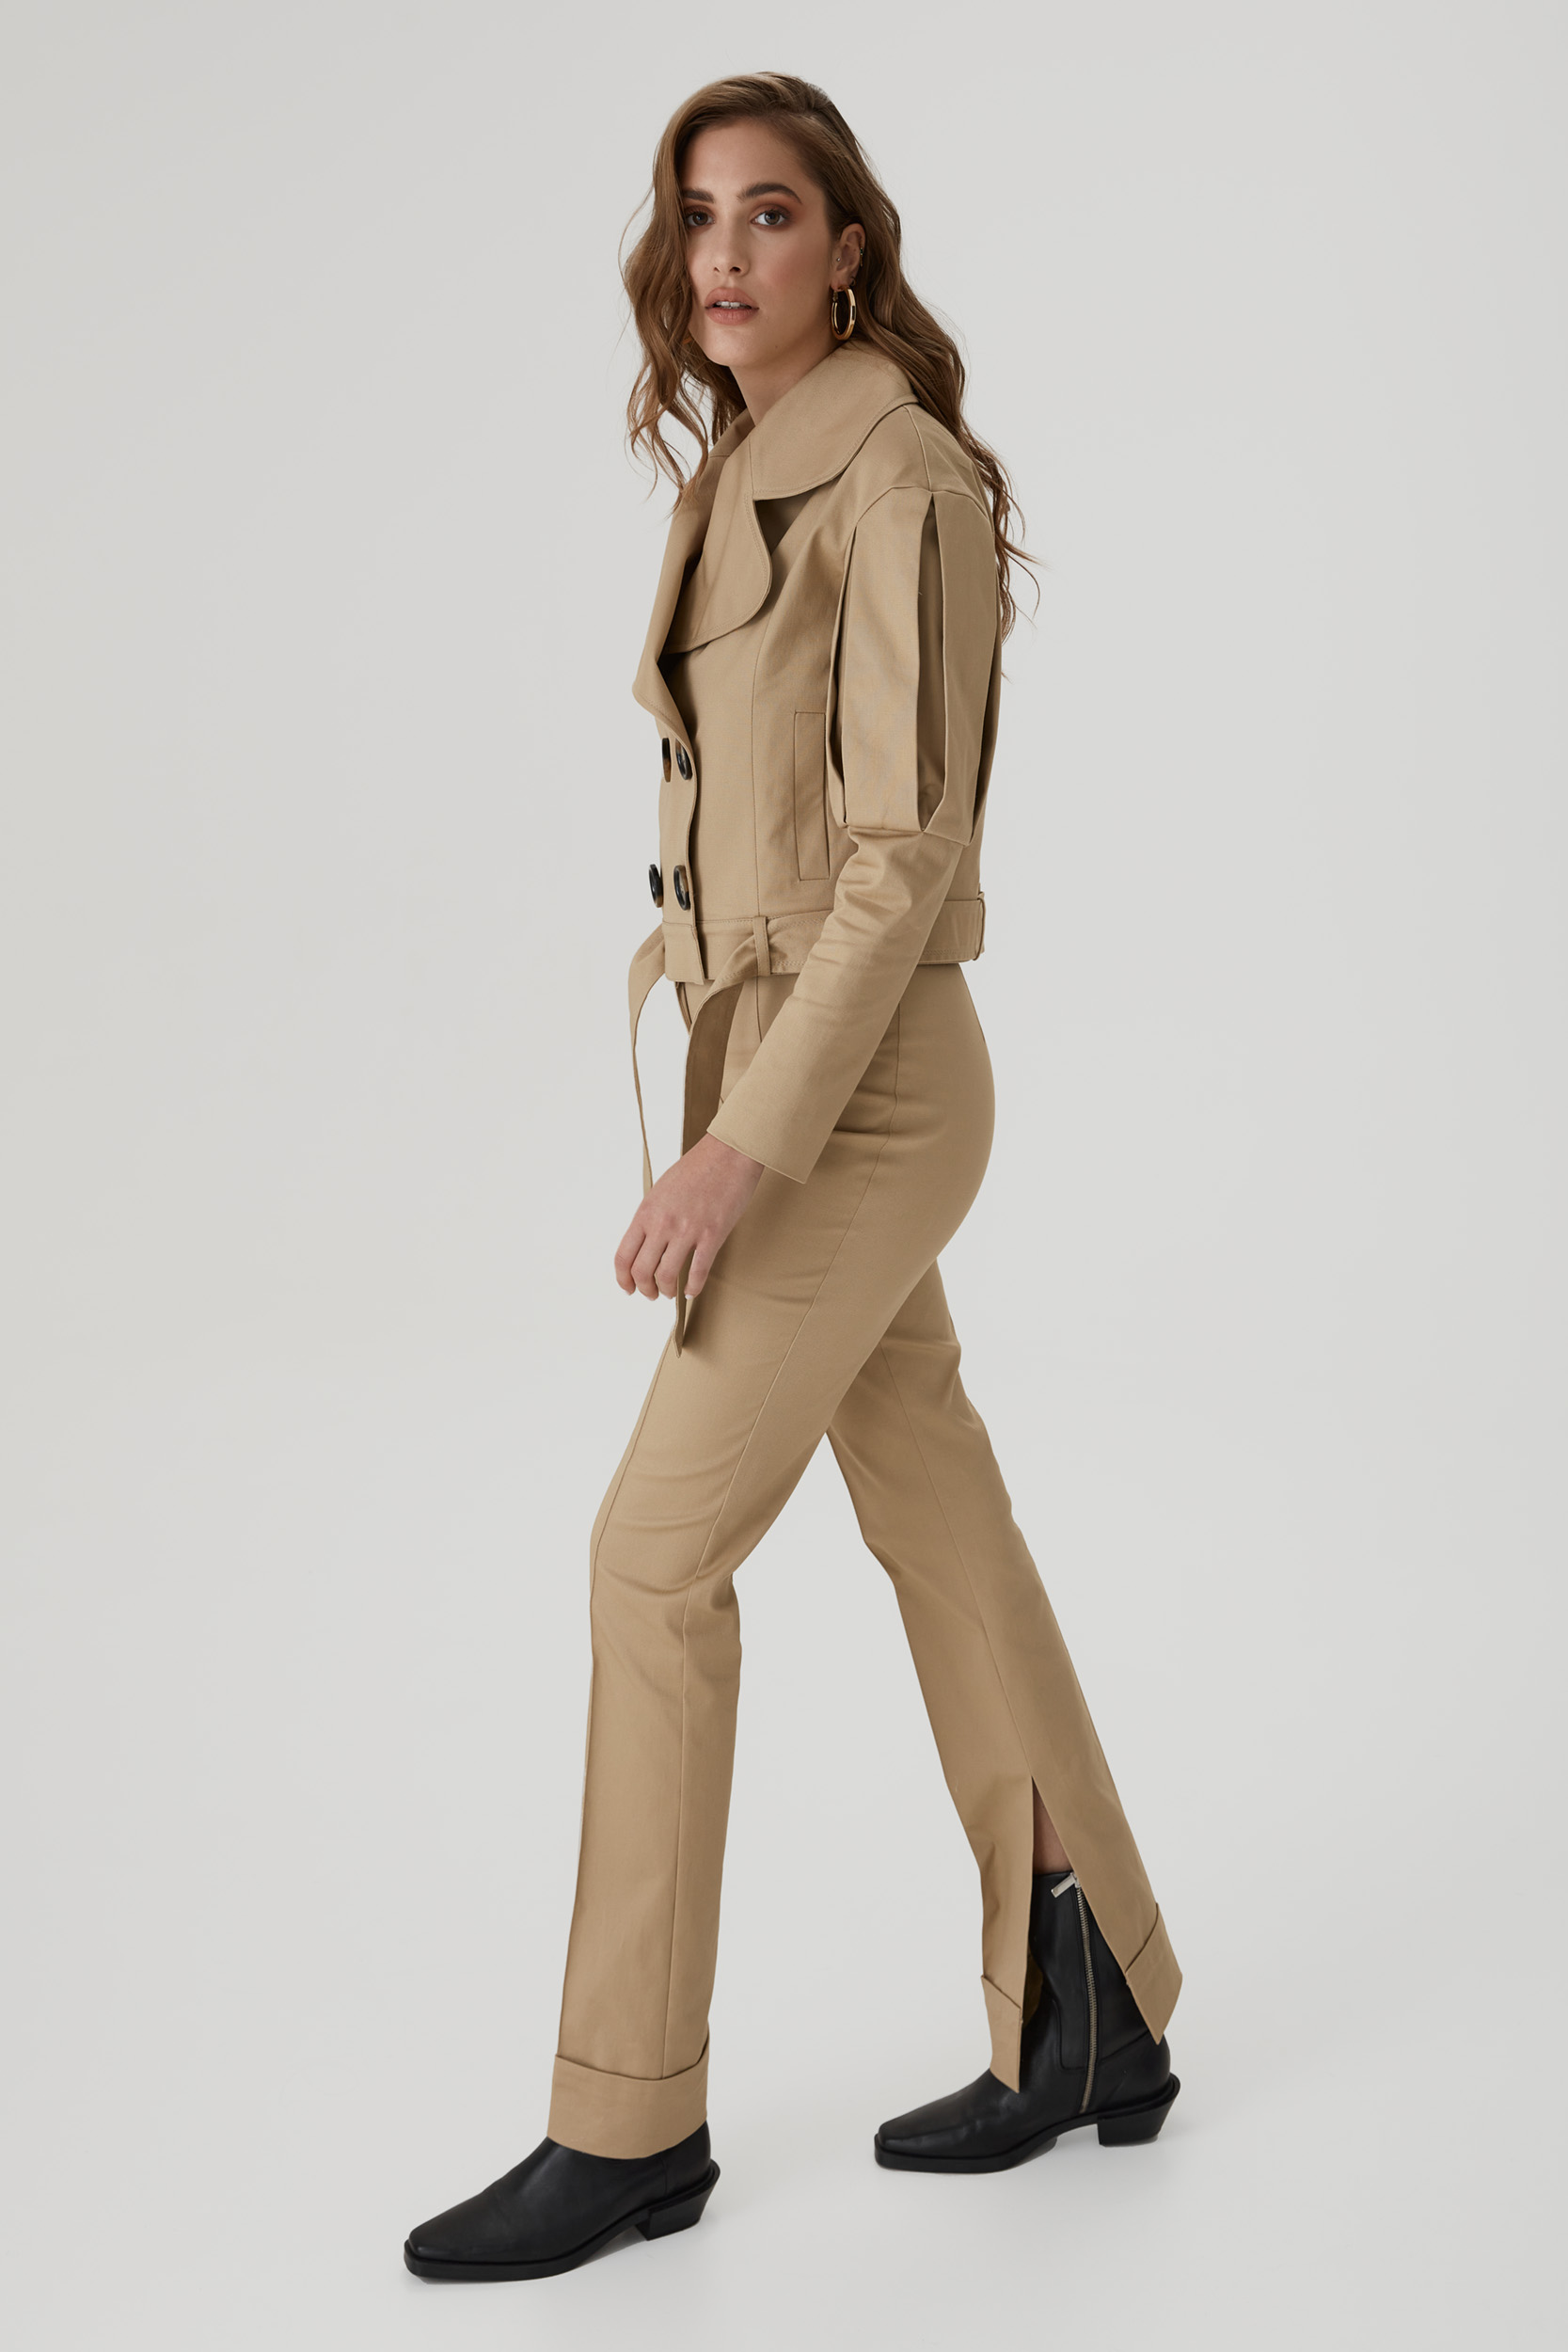 High rise trousers in beige